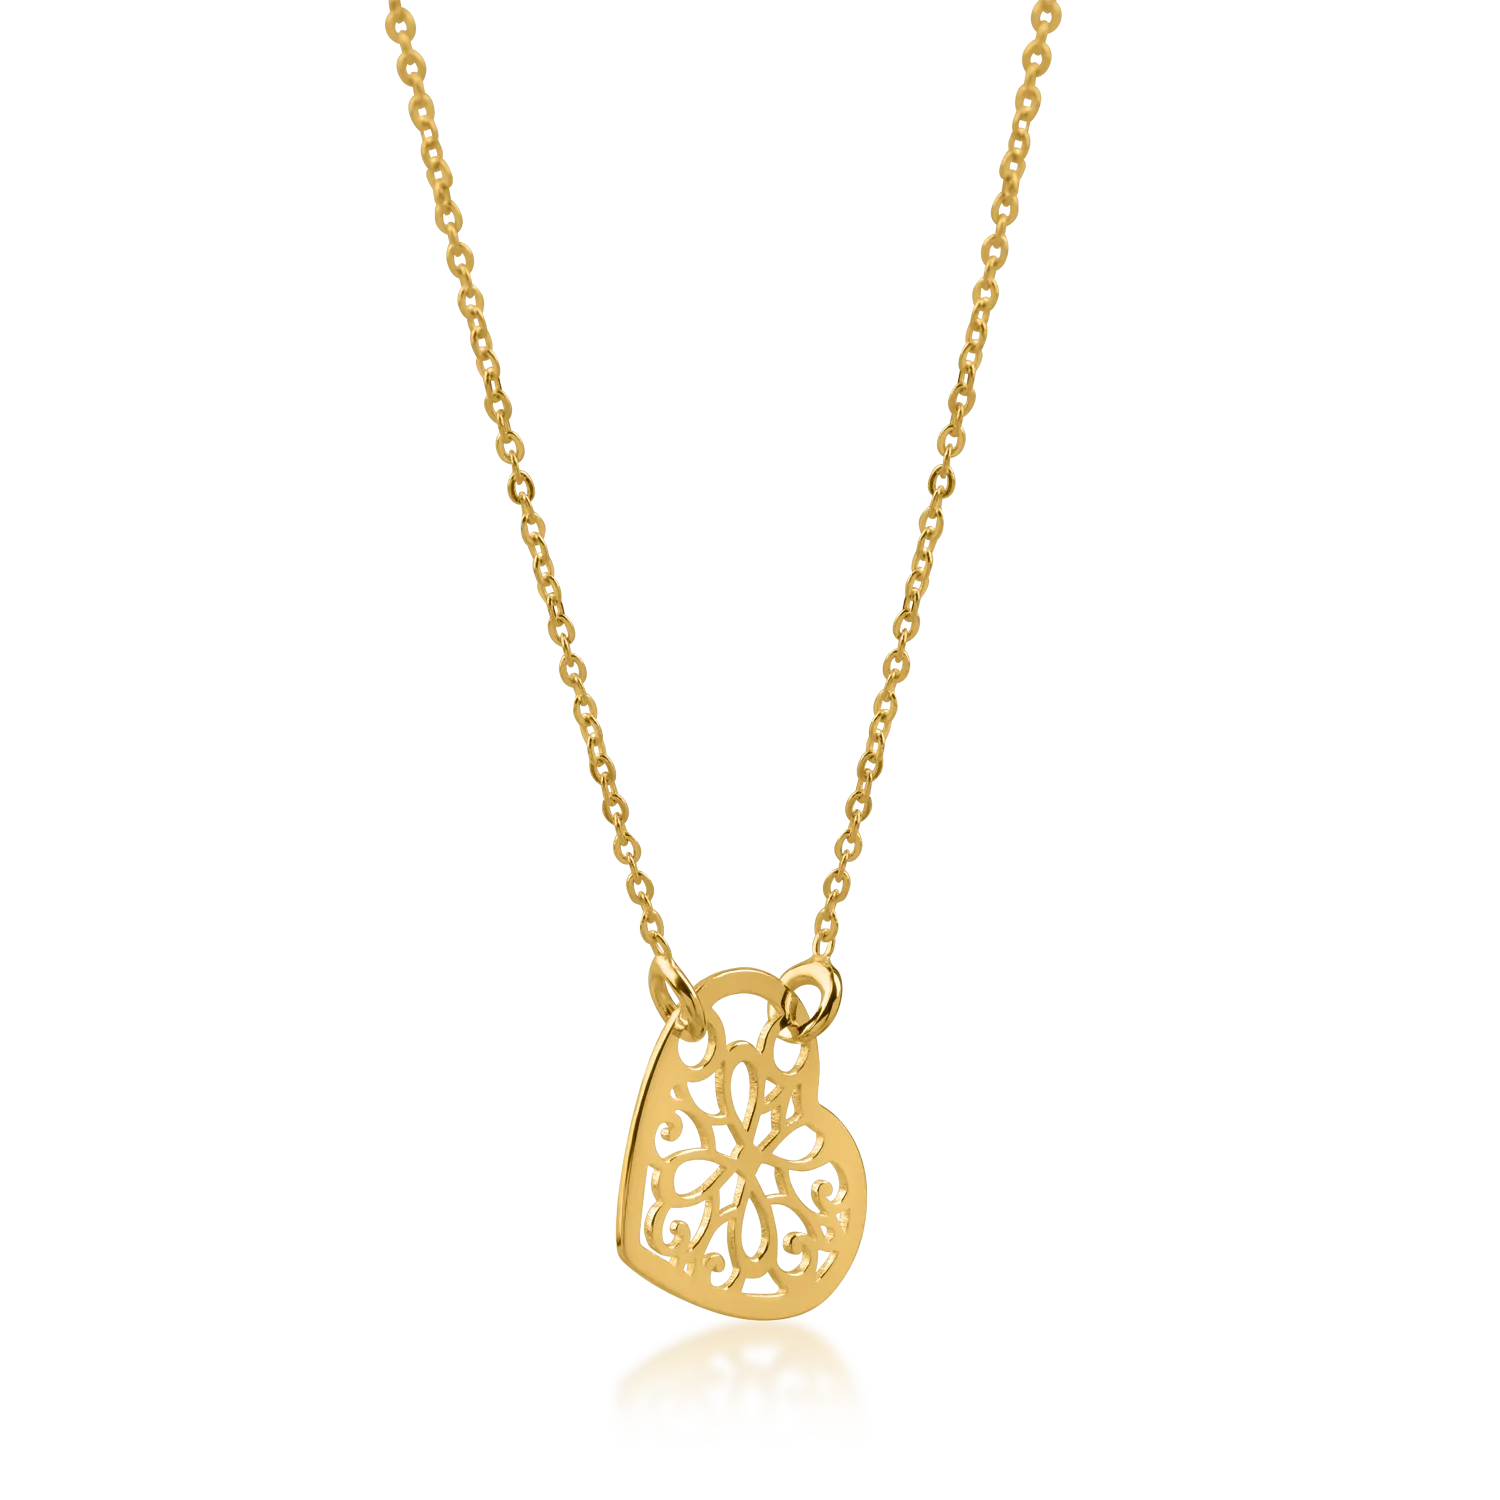 Yellow gold heart pendant necklace